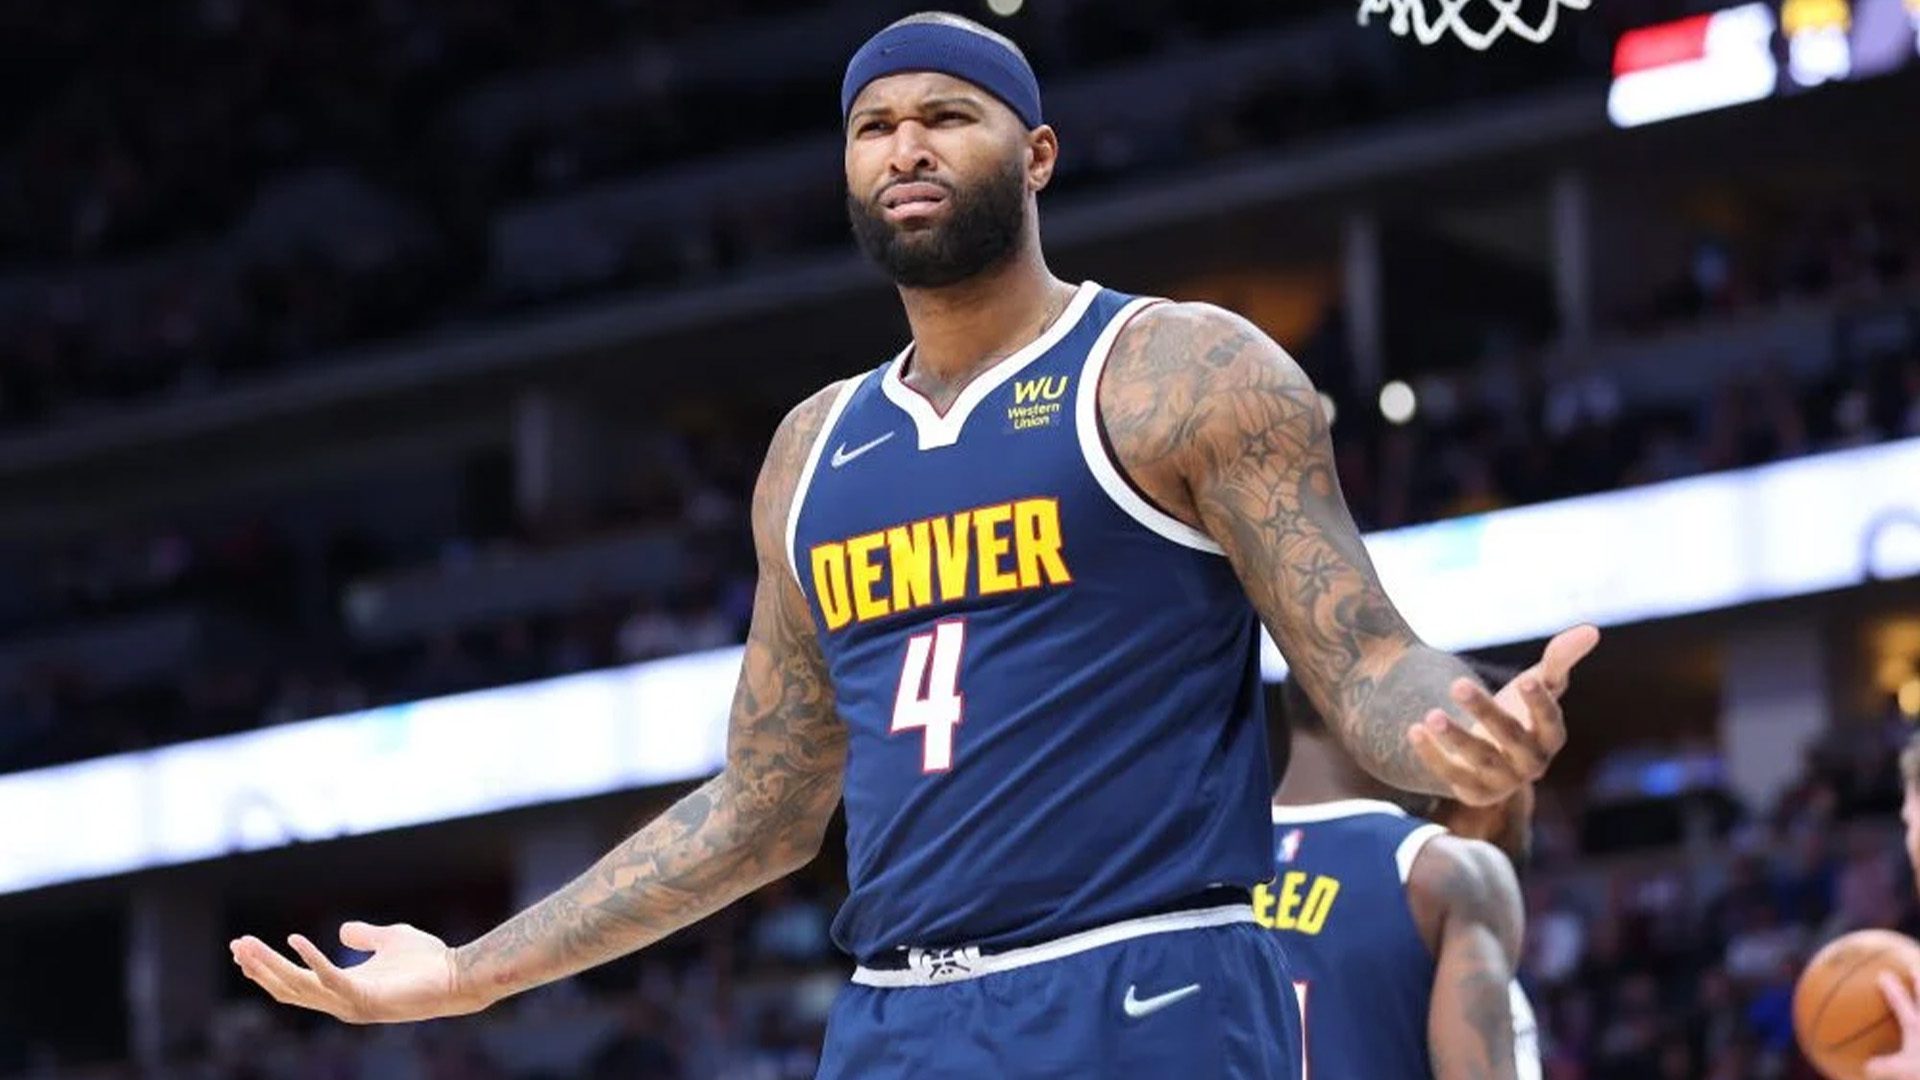 Warriors GM Explains Why DeMarcus Cousins Isn’t in the NBA